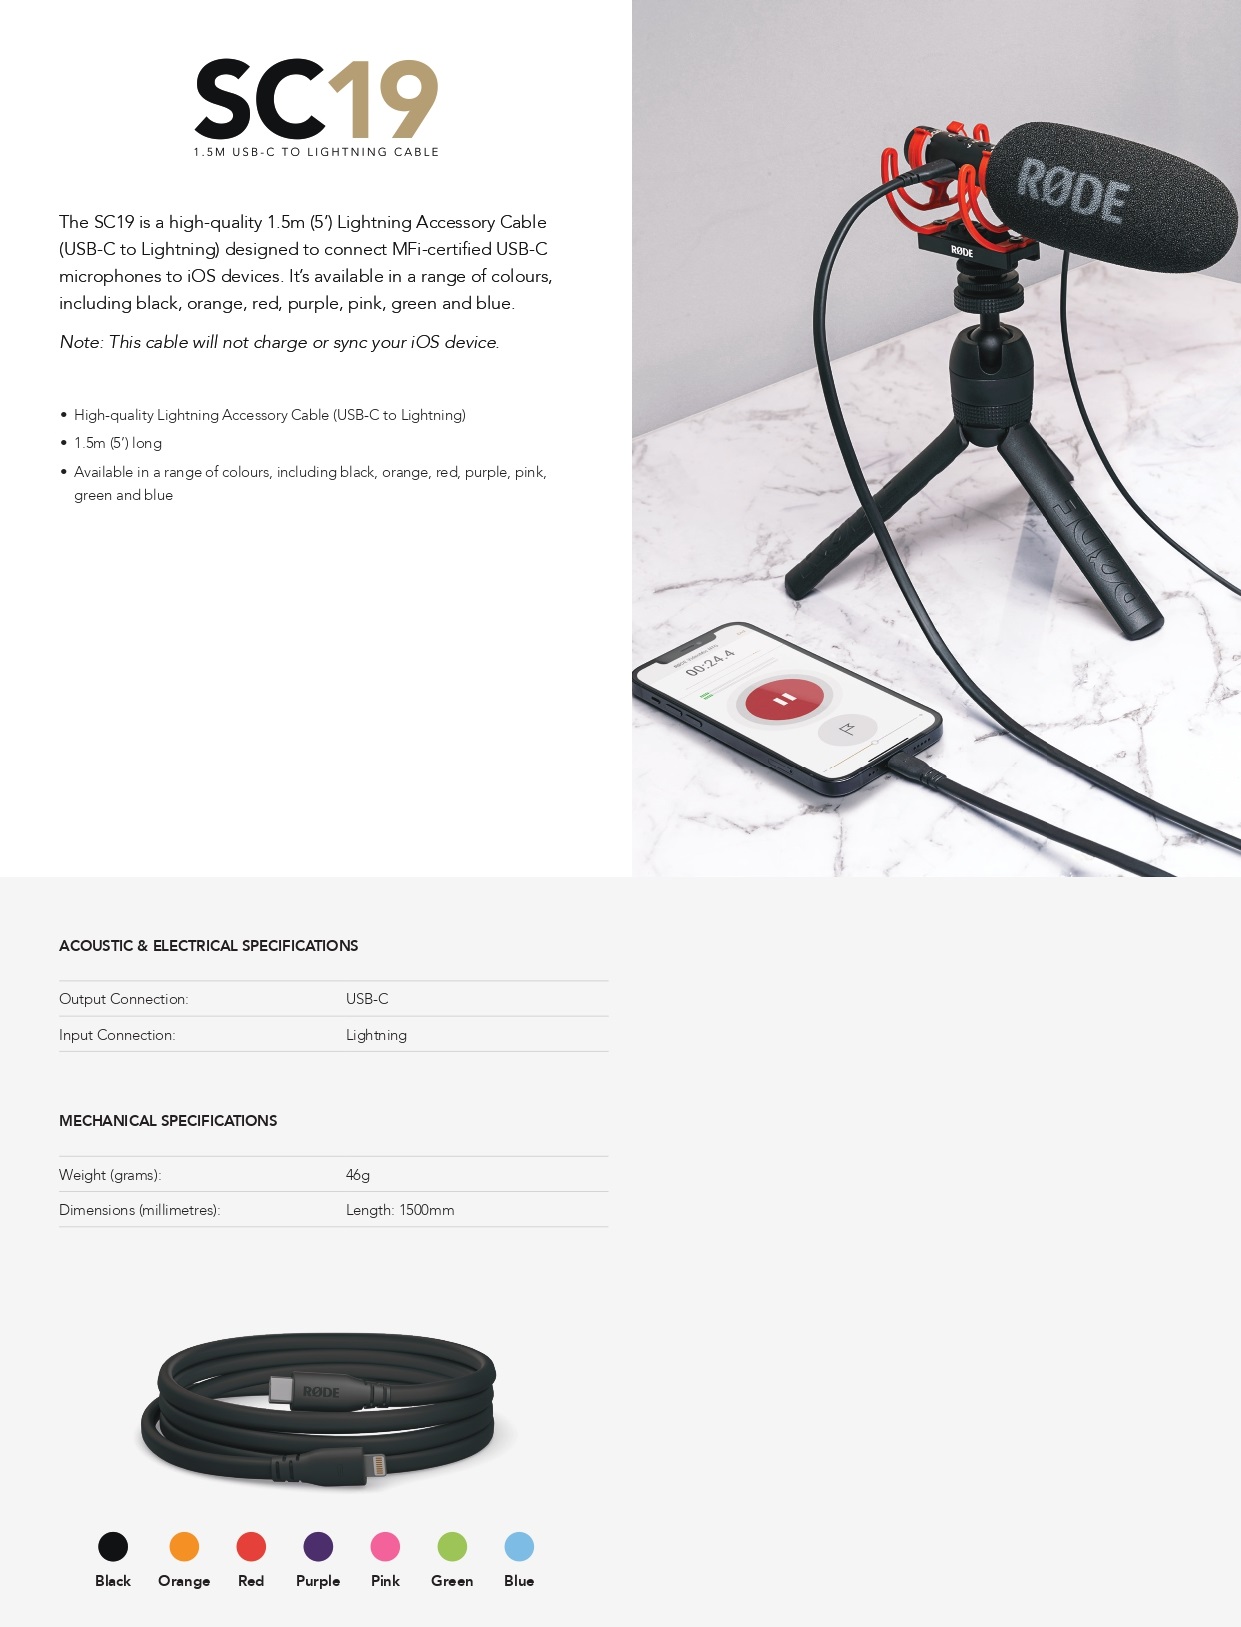 A large marketing image providing additional information about the product Rode USB-C to Lightning Cable 1.5m - Red - Additional alt info not provided